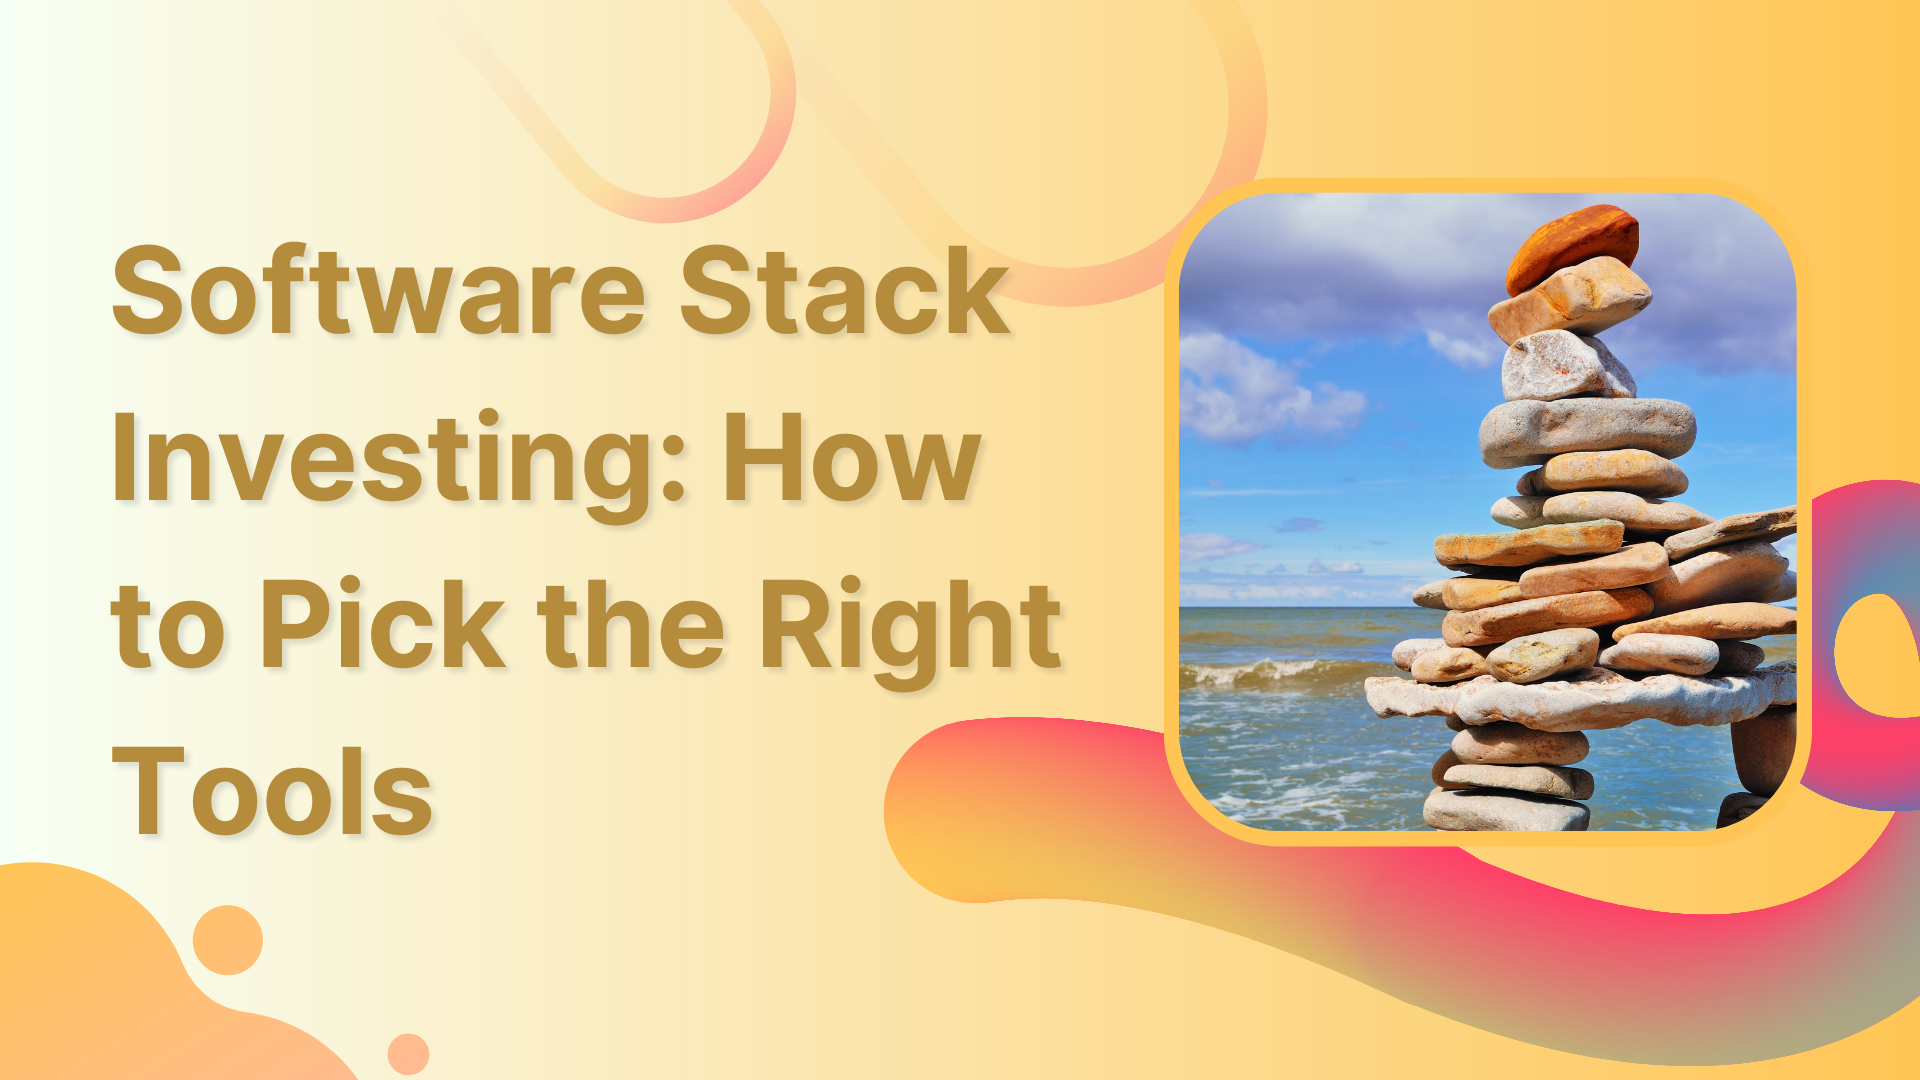 Software Stack Investing: How to Pick the Right Tools